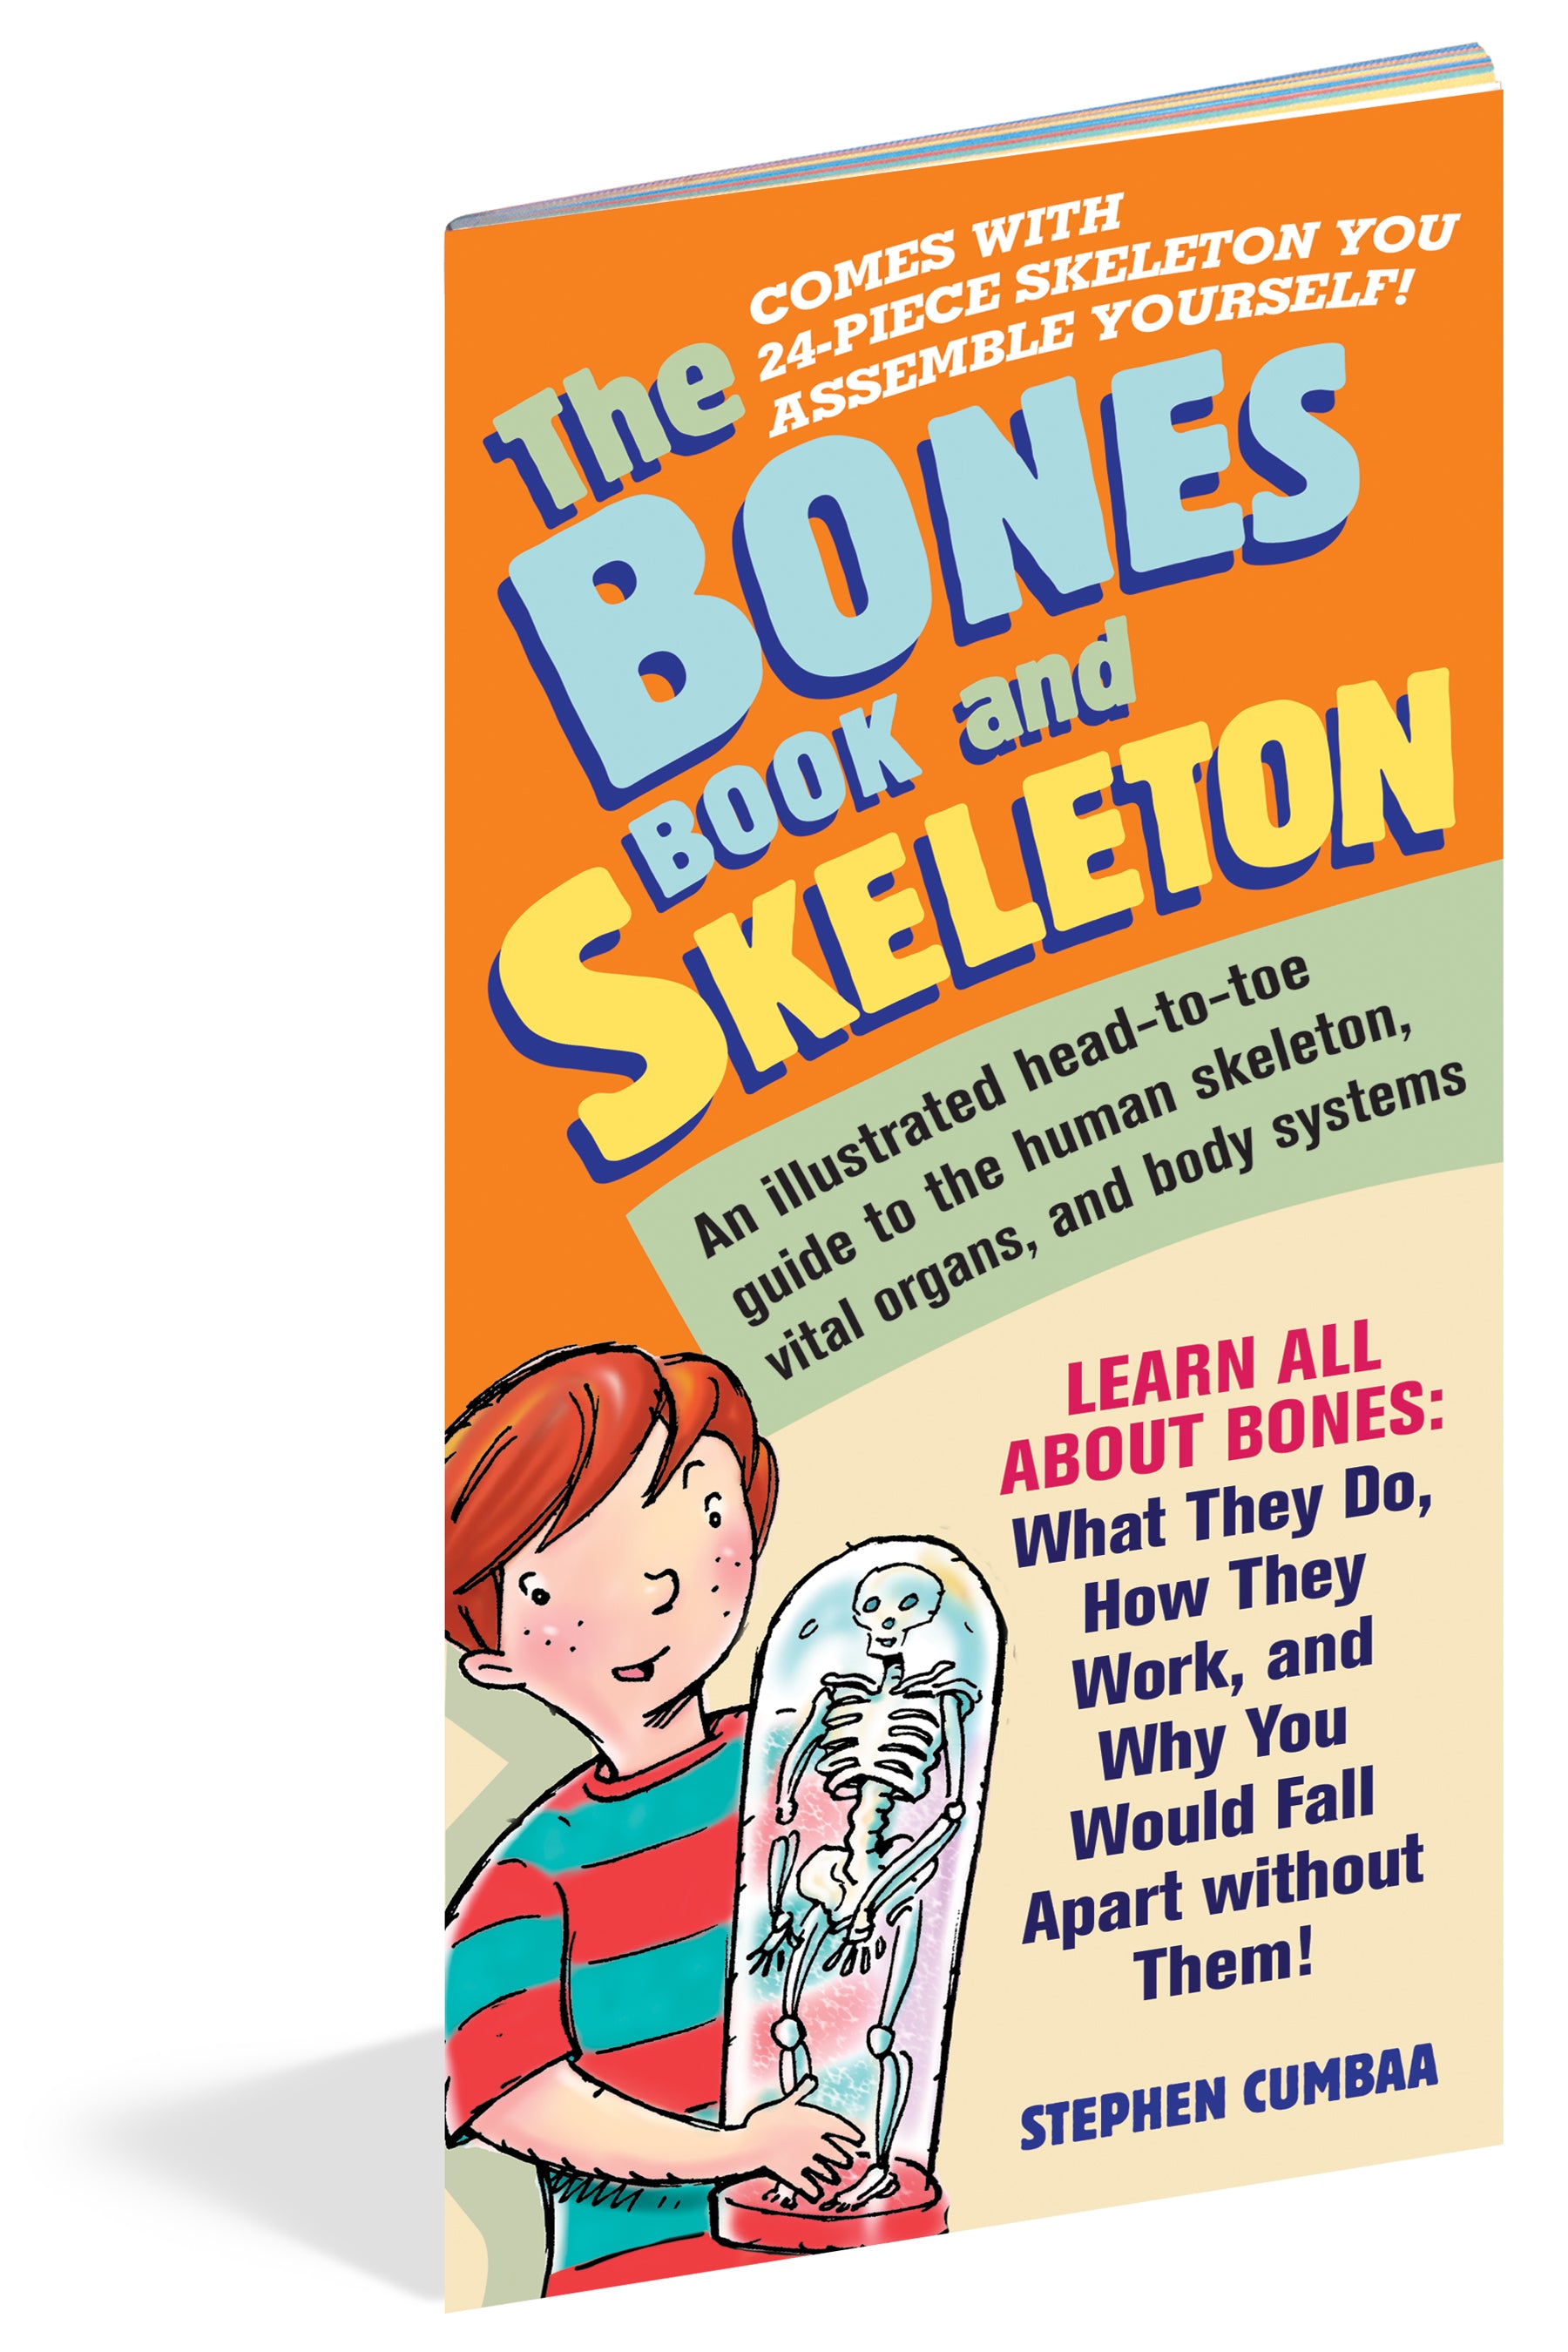 The Bones Book and Skeleton    